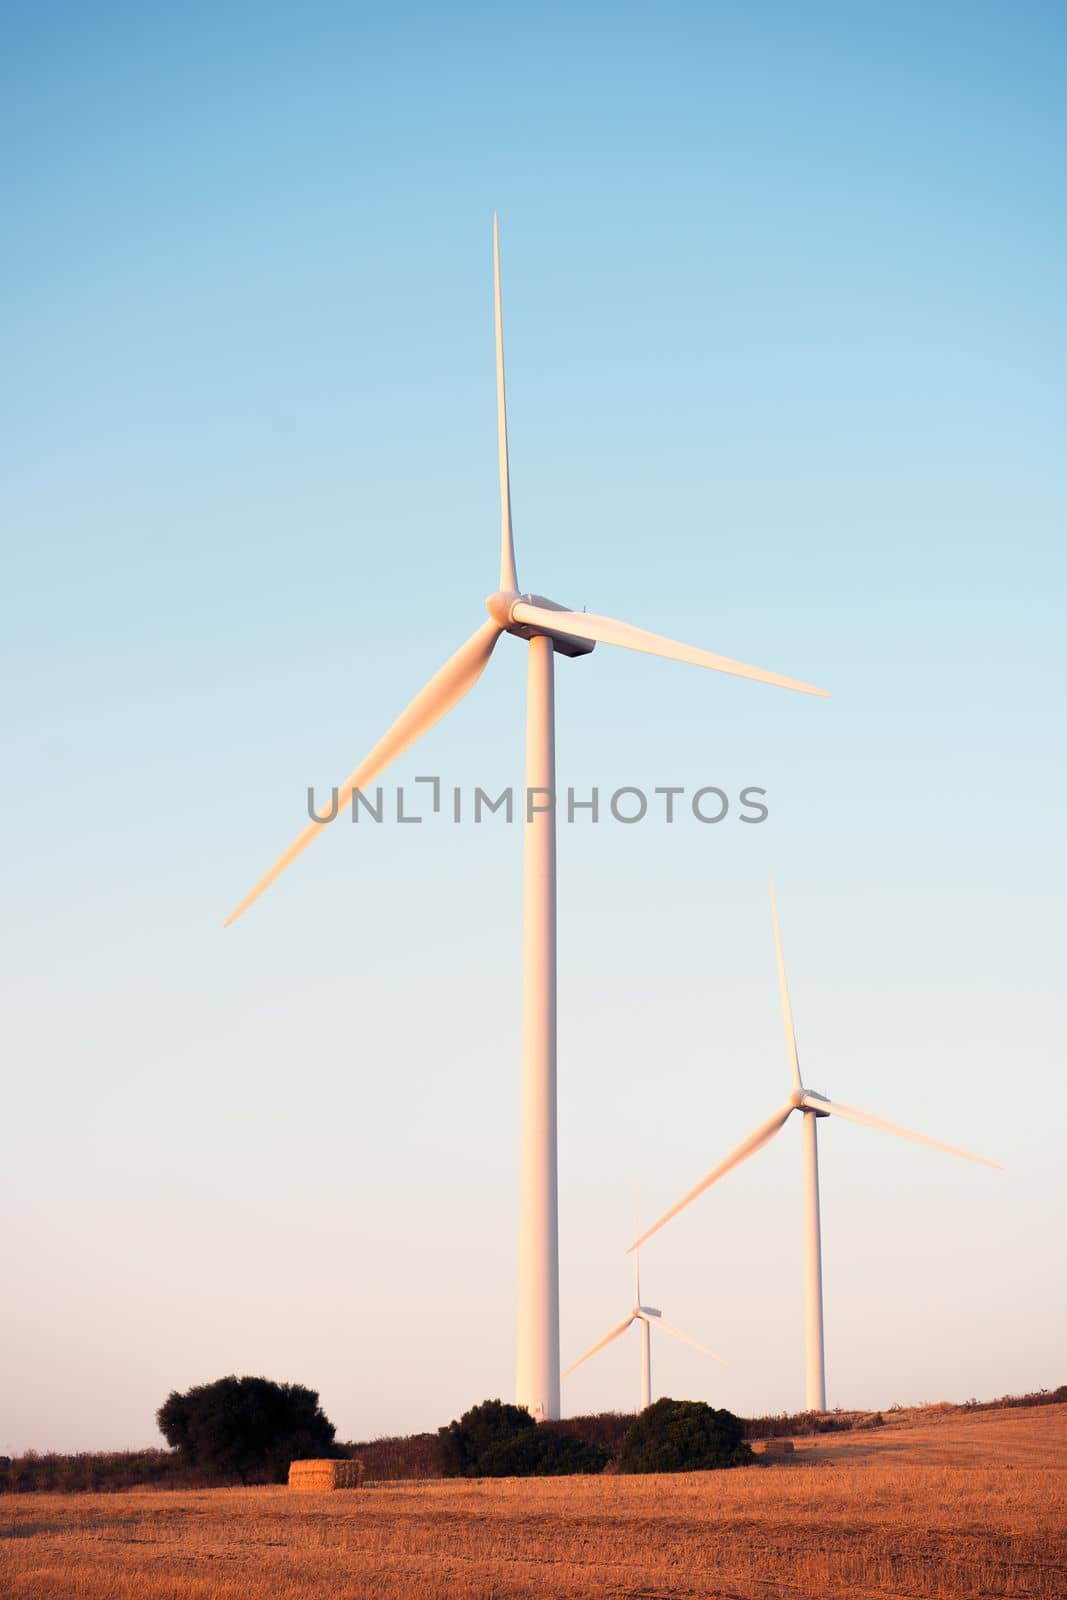 vertical photo of three windmills on a small hill producing clean energy in a wind farm at sunset. It is in a rural environment surrounded by crops and nature, the sky is clean and clear. Copy space